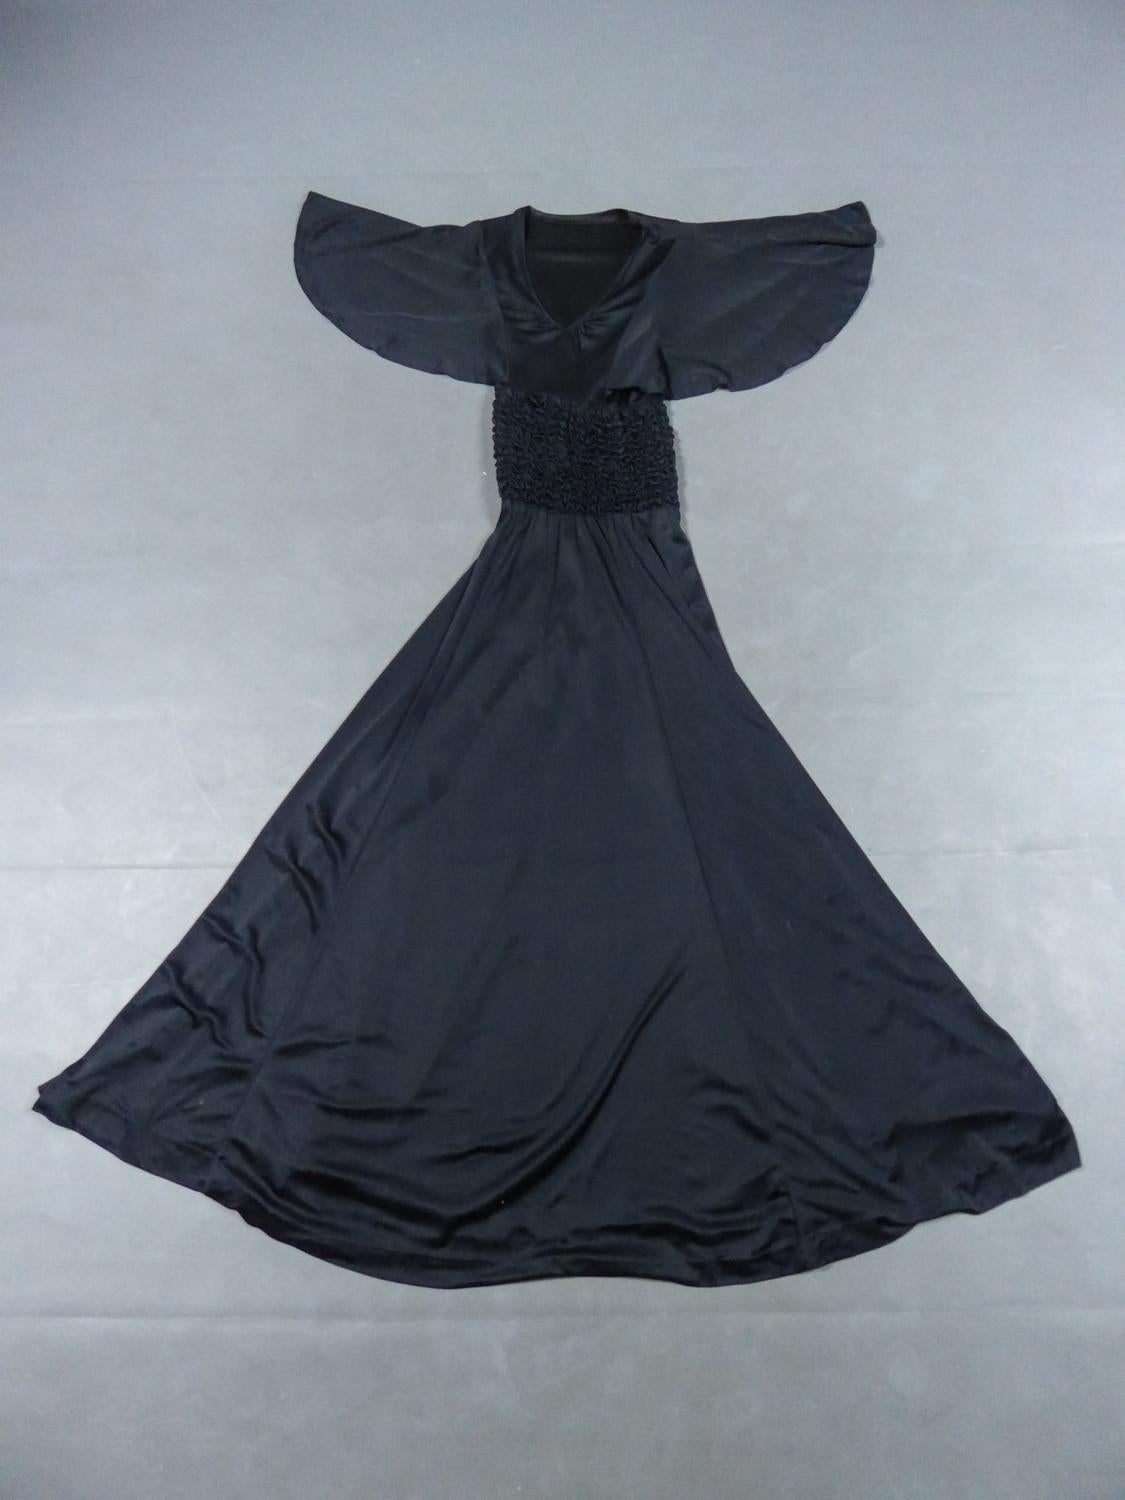 Circa 1990
France

Long evening dress in black strech silk jersey from the 90s. Skin-tight cut at the level of the bustier flaring from the waist leaving a fluid and loose skirt. Gathered neckline in V-shape, bat sleeves and waist marked by a